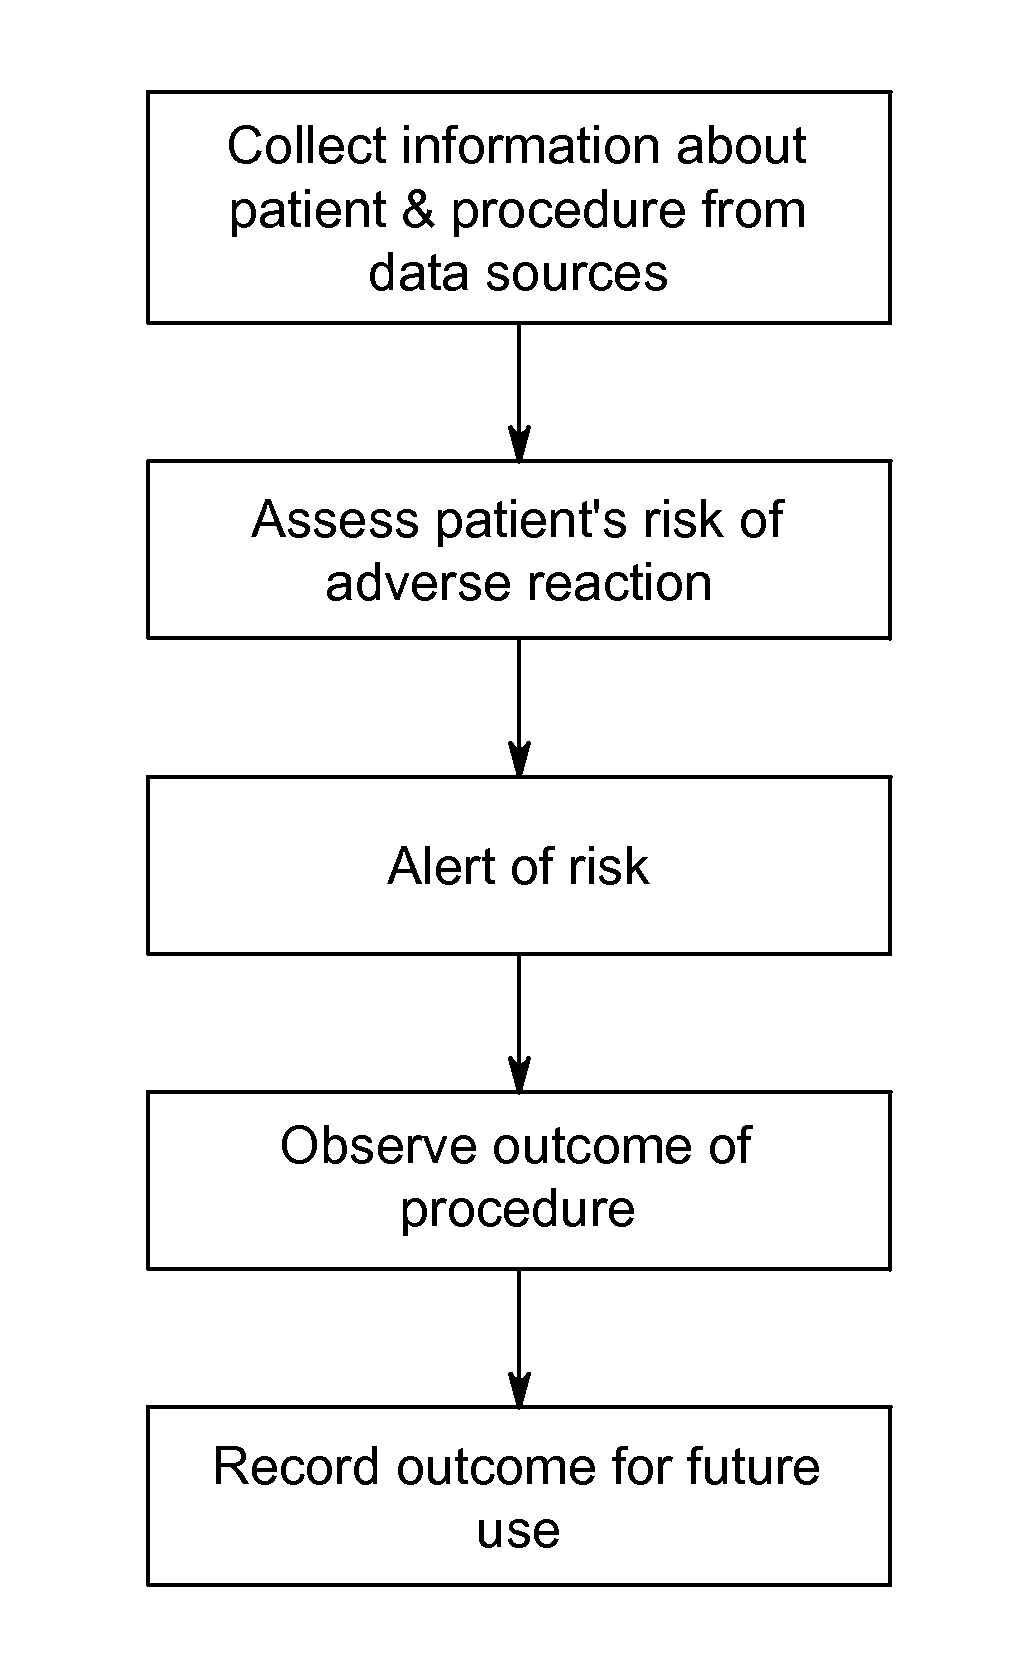 Systems and methods for managing adverse reactions in contrast media-based medical procedures